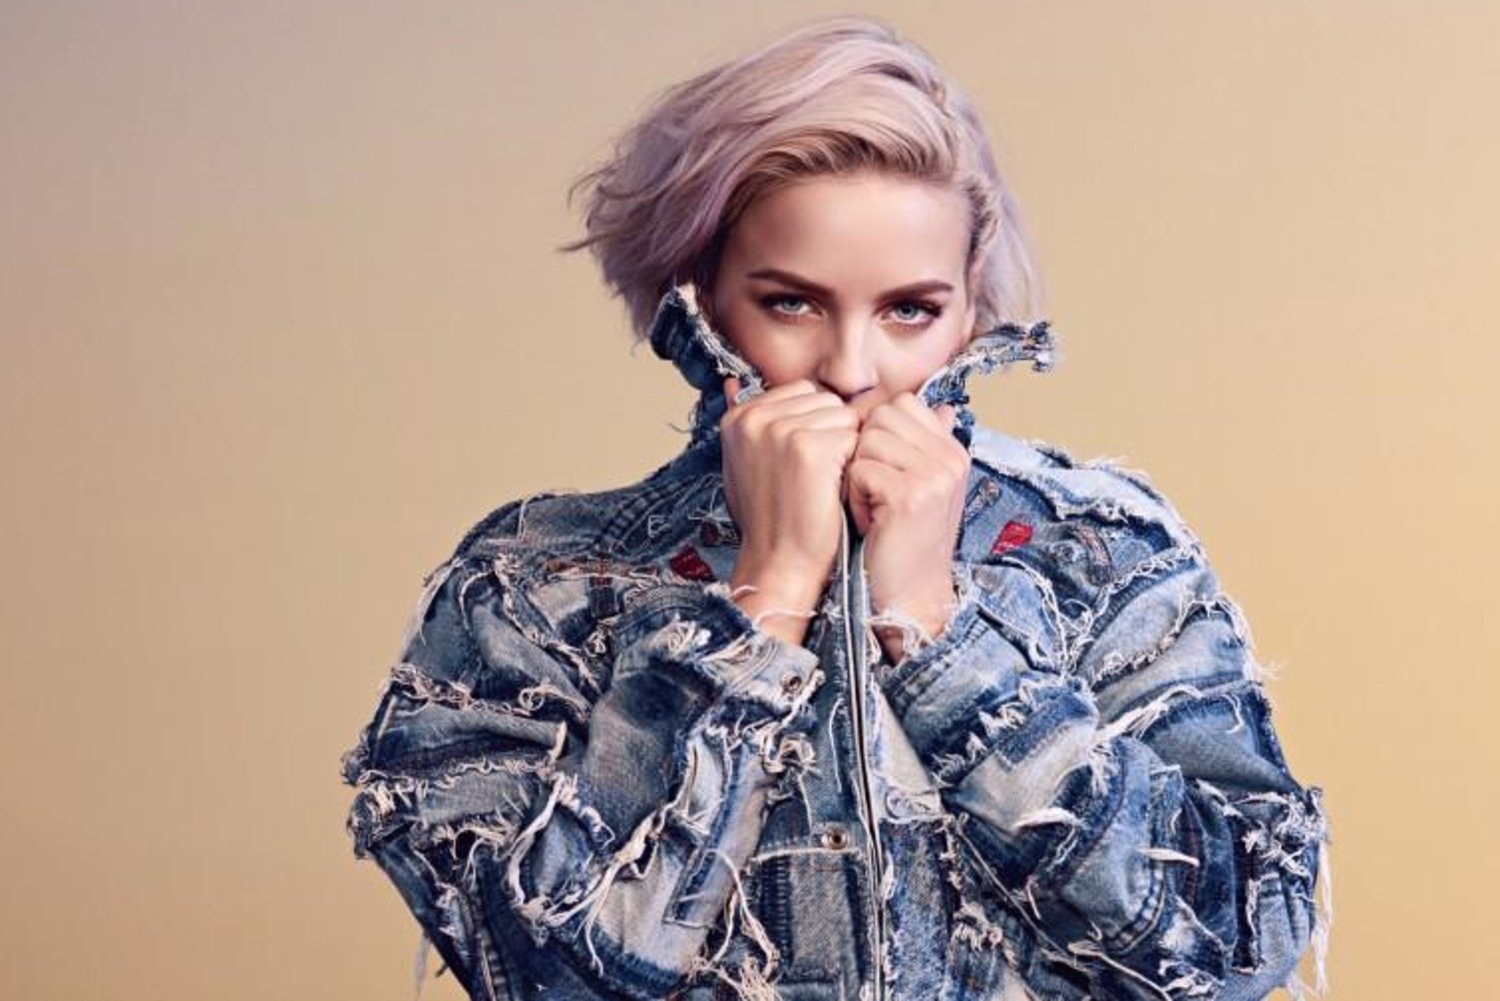 watch-anne-marie-perform-exclusively-at-bestival-for-red-bull-tv